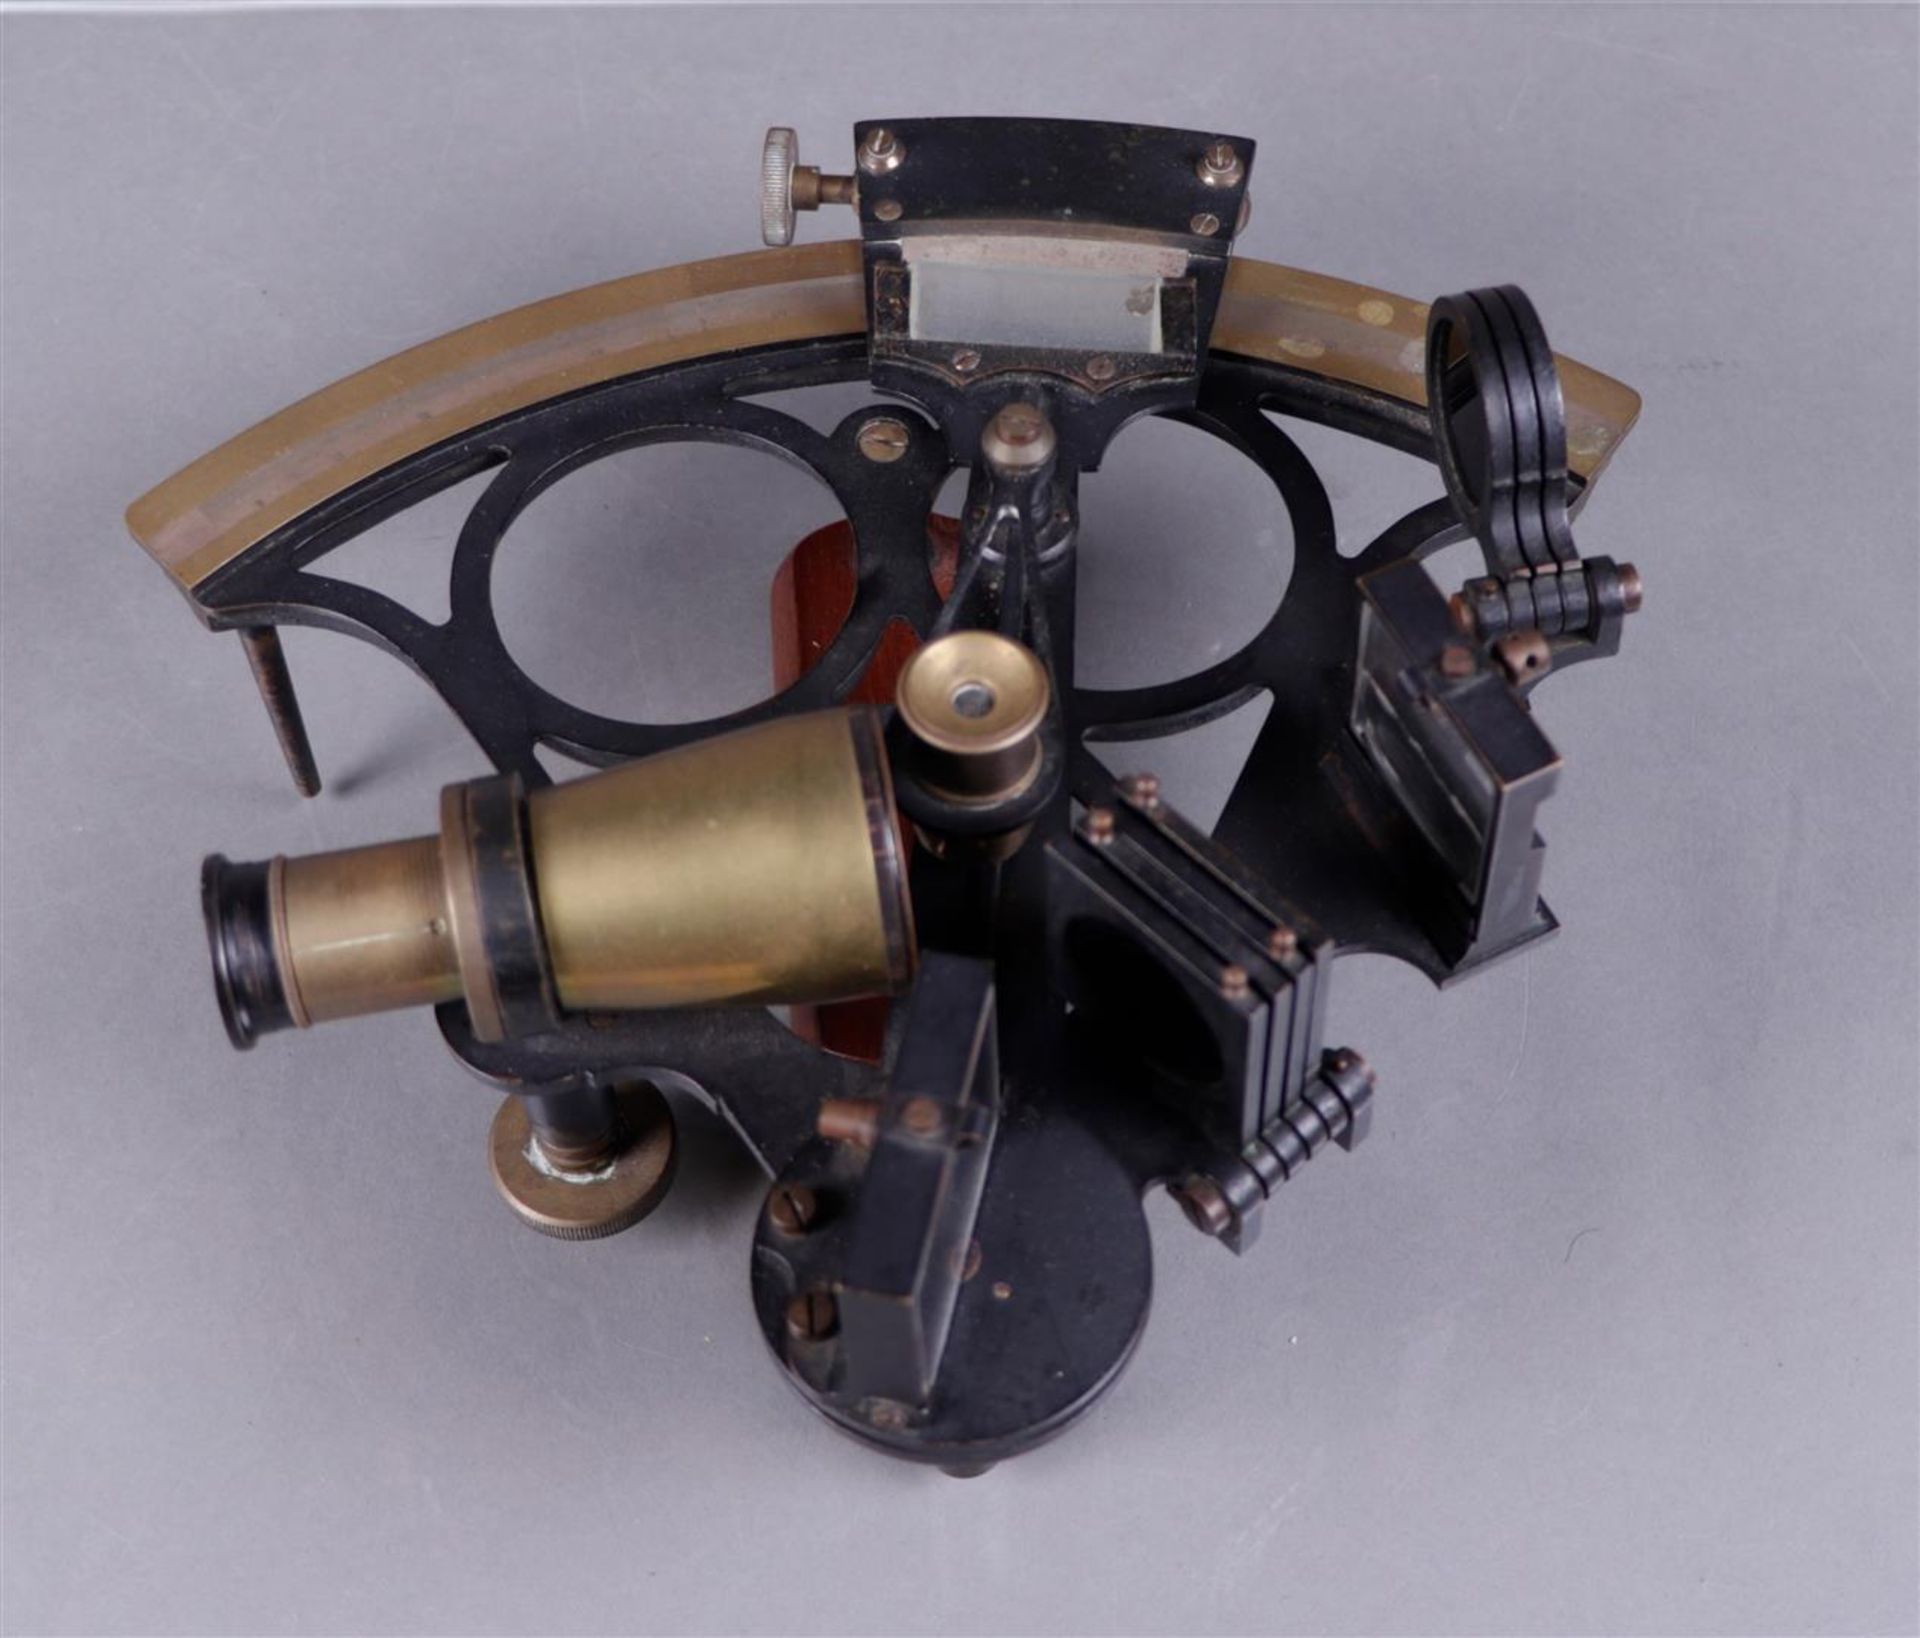 A ship's sextant in original case. Rotterdam, early 20th century.
28 x 25 cm. - Image 8 of 8